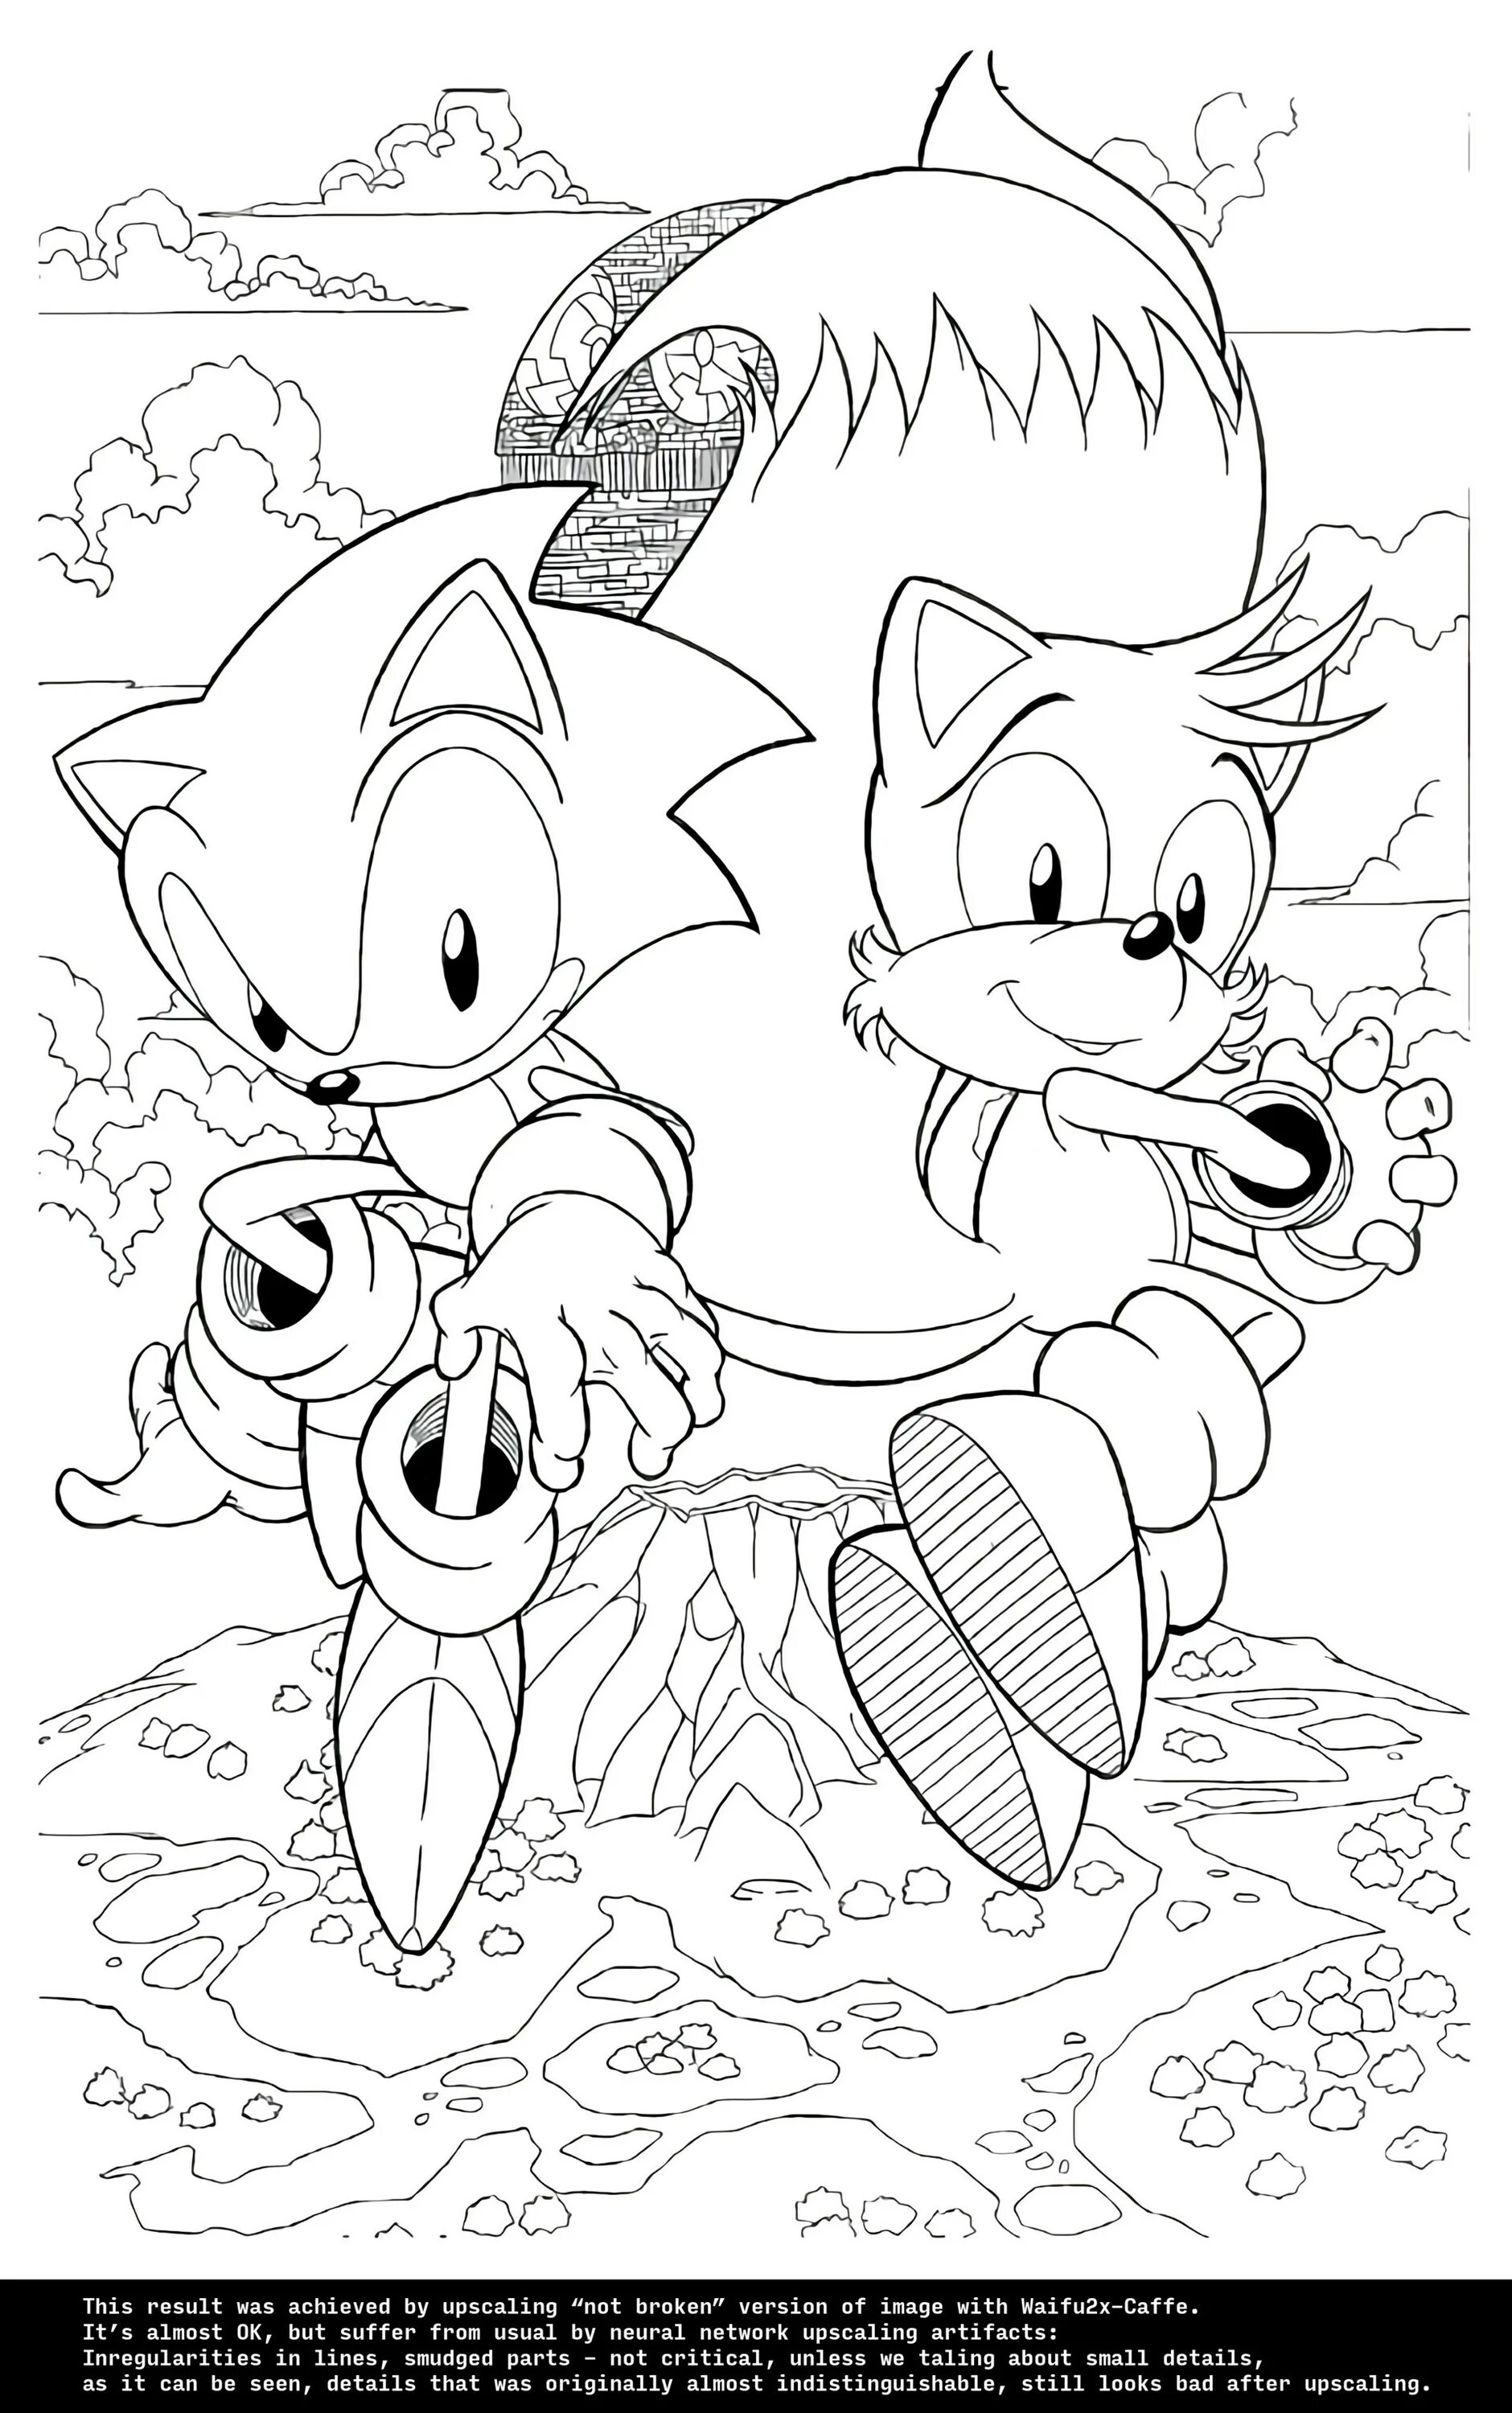 Fun coloring sonic the hedgehog